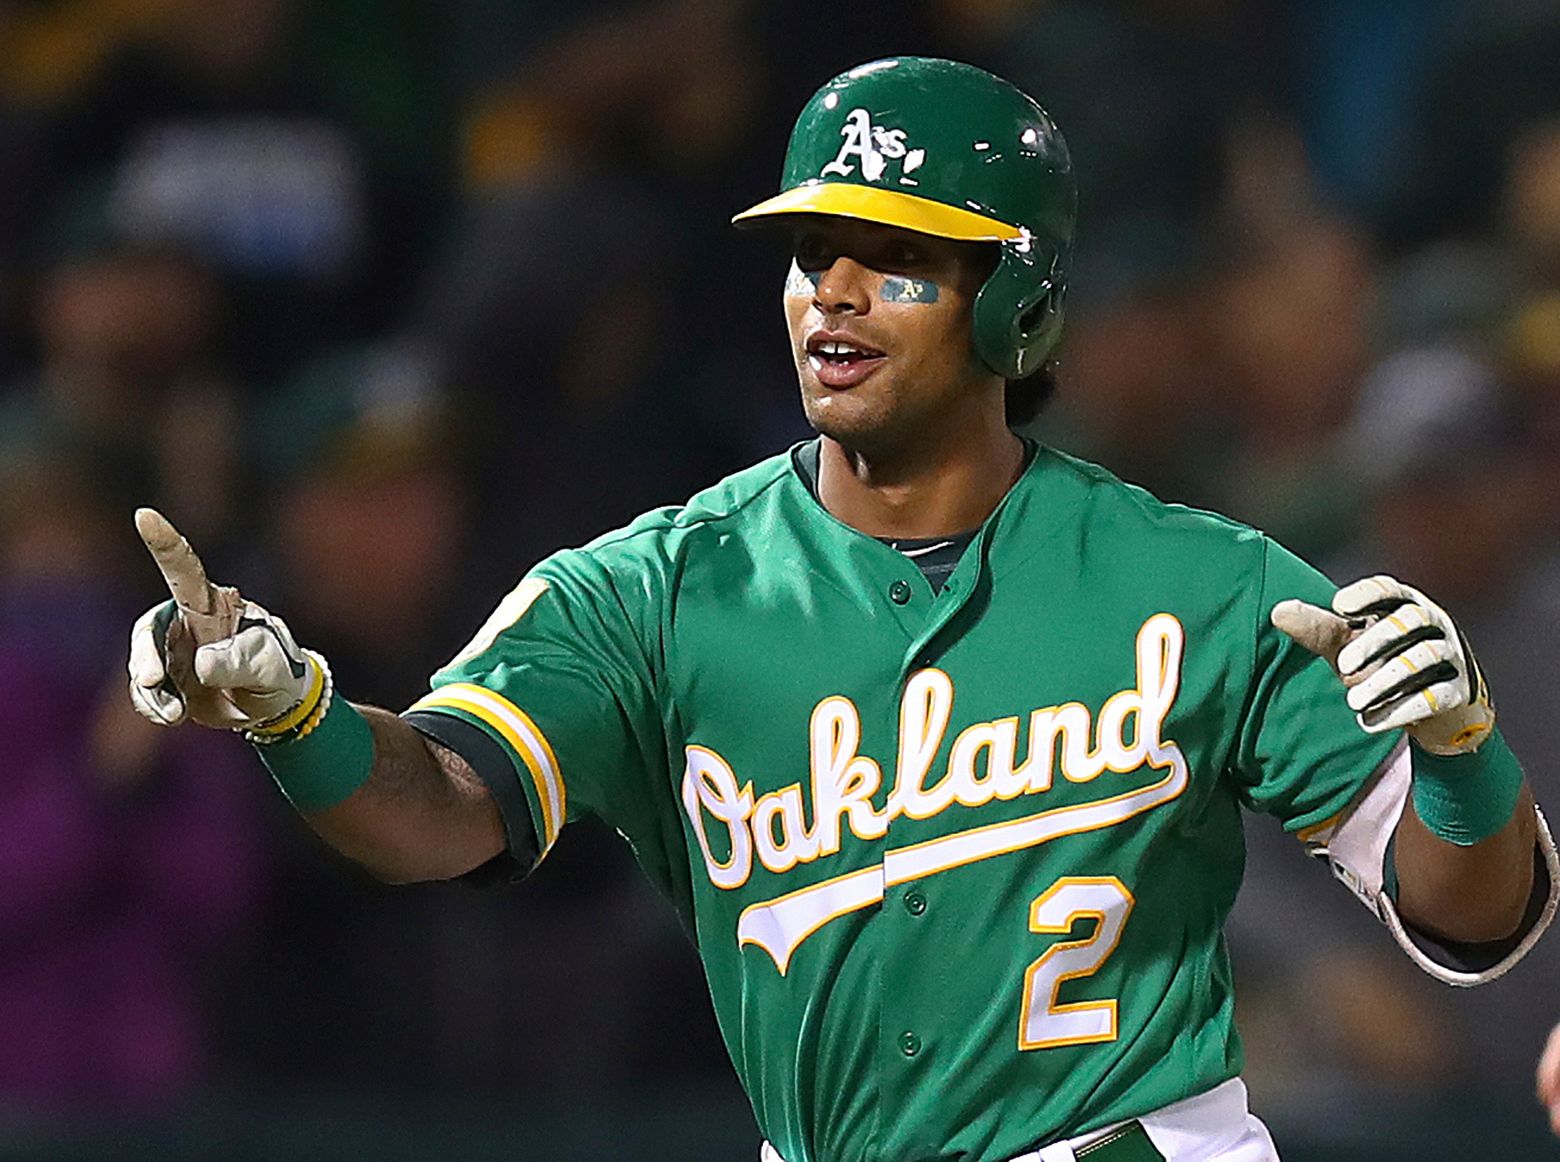 Khris Davis wants to lead A's to playoffs again and again